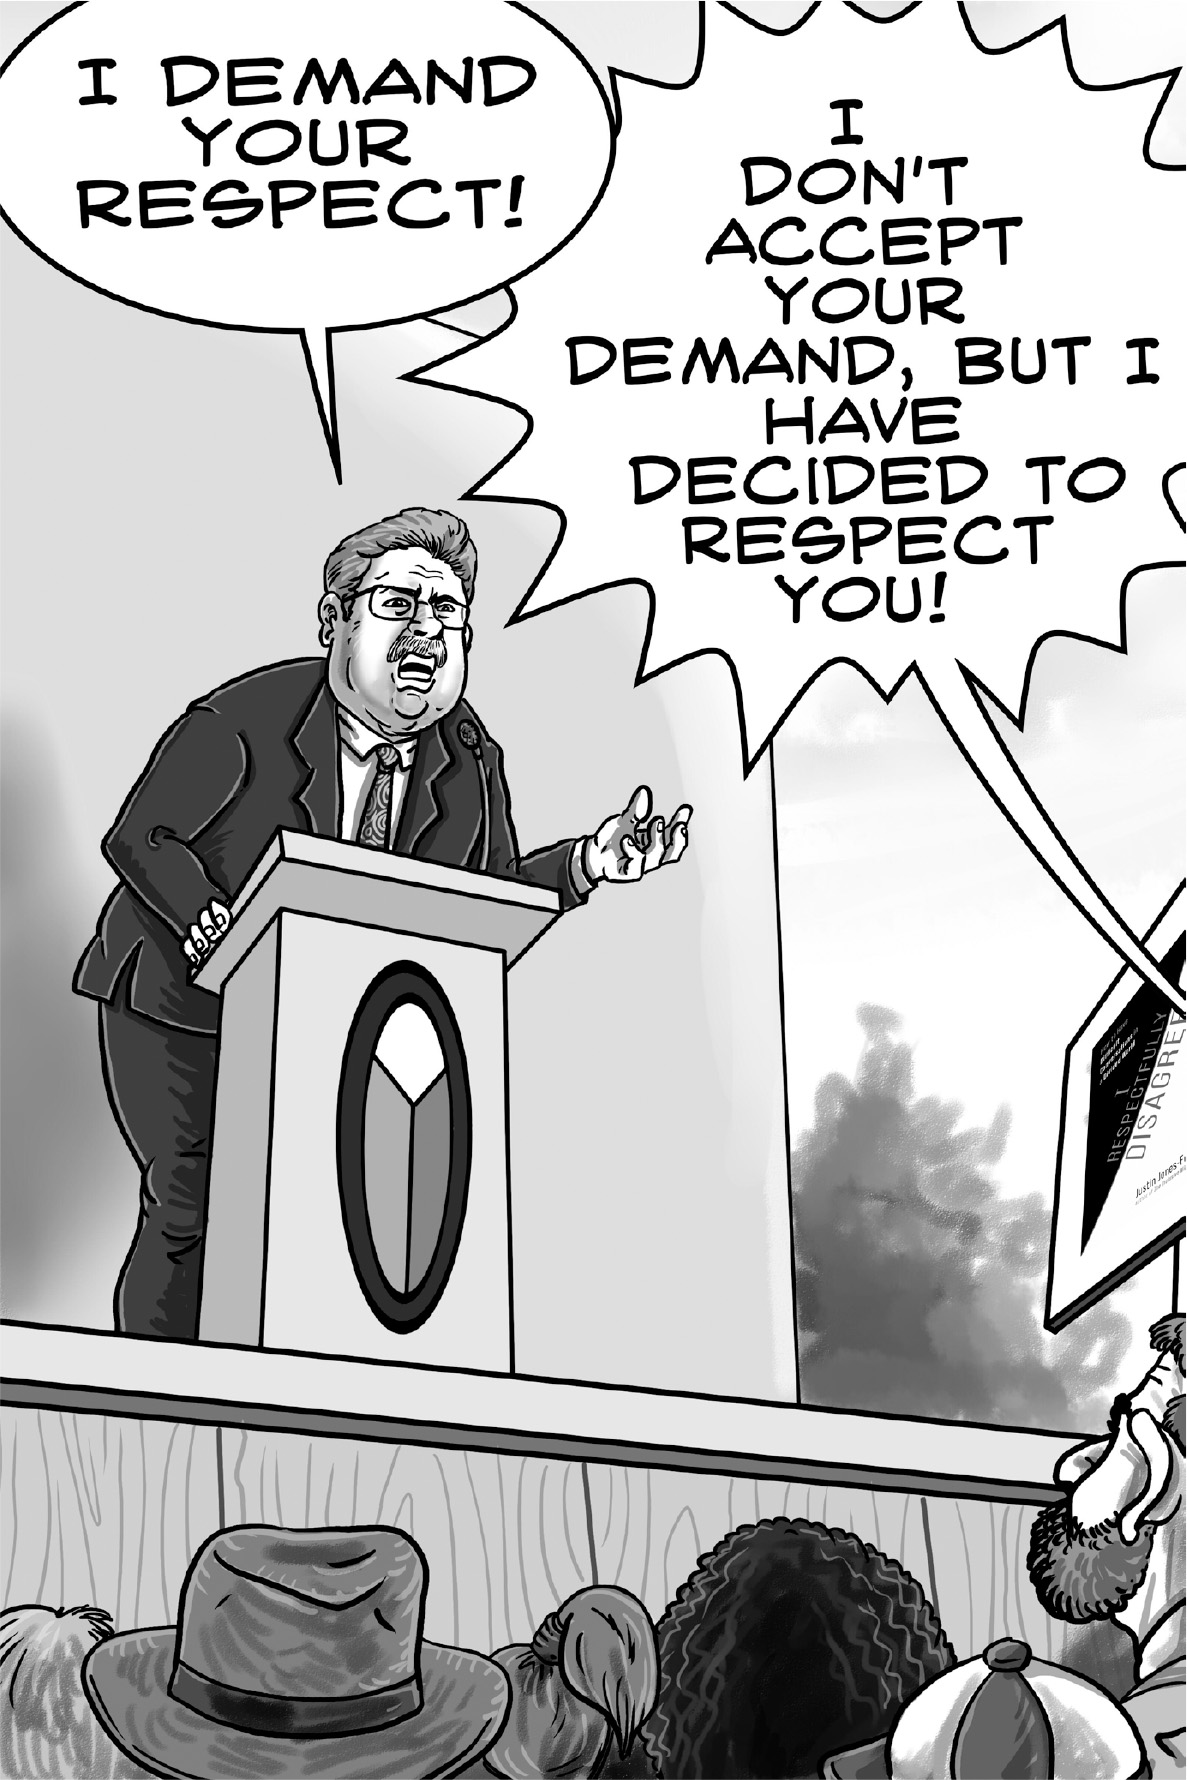 A cartoon of a person standing at a lecturn onstage demanding respect from the crowd. The crowd shouts back declining the demand but still choosing to show respect.